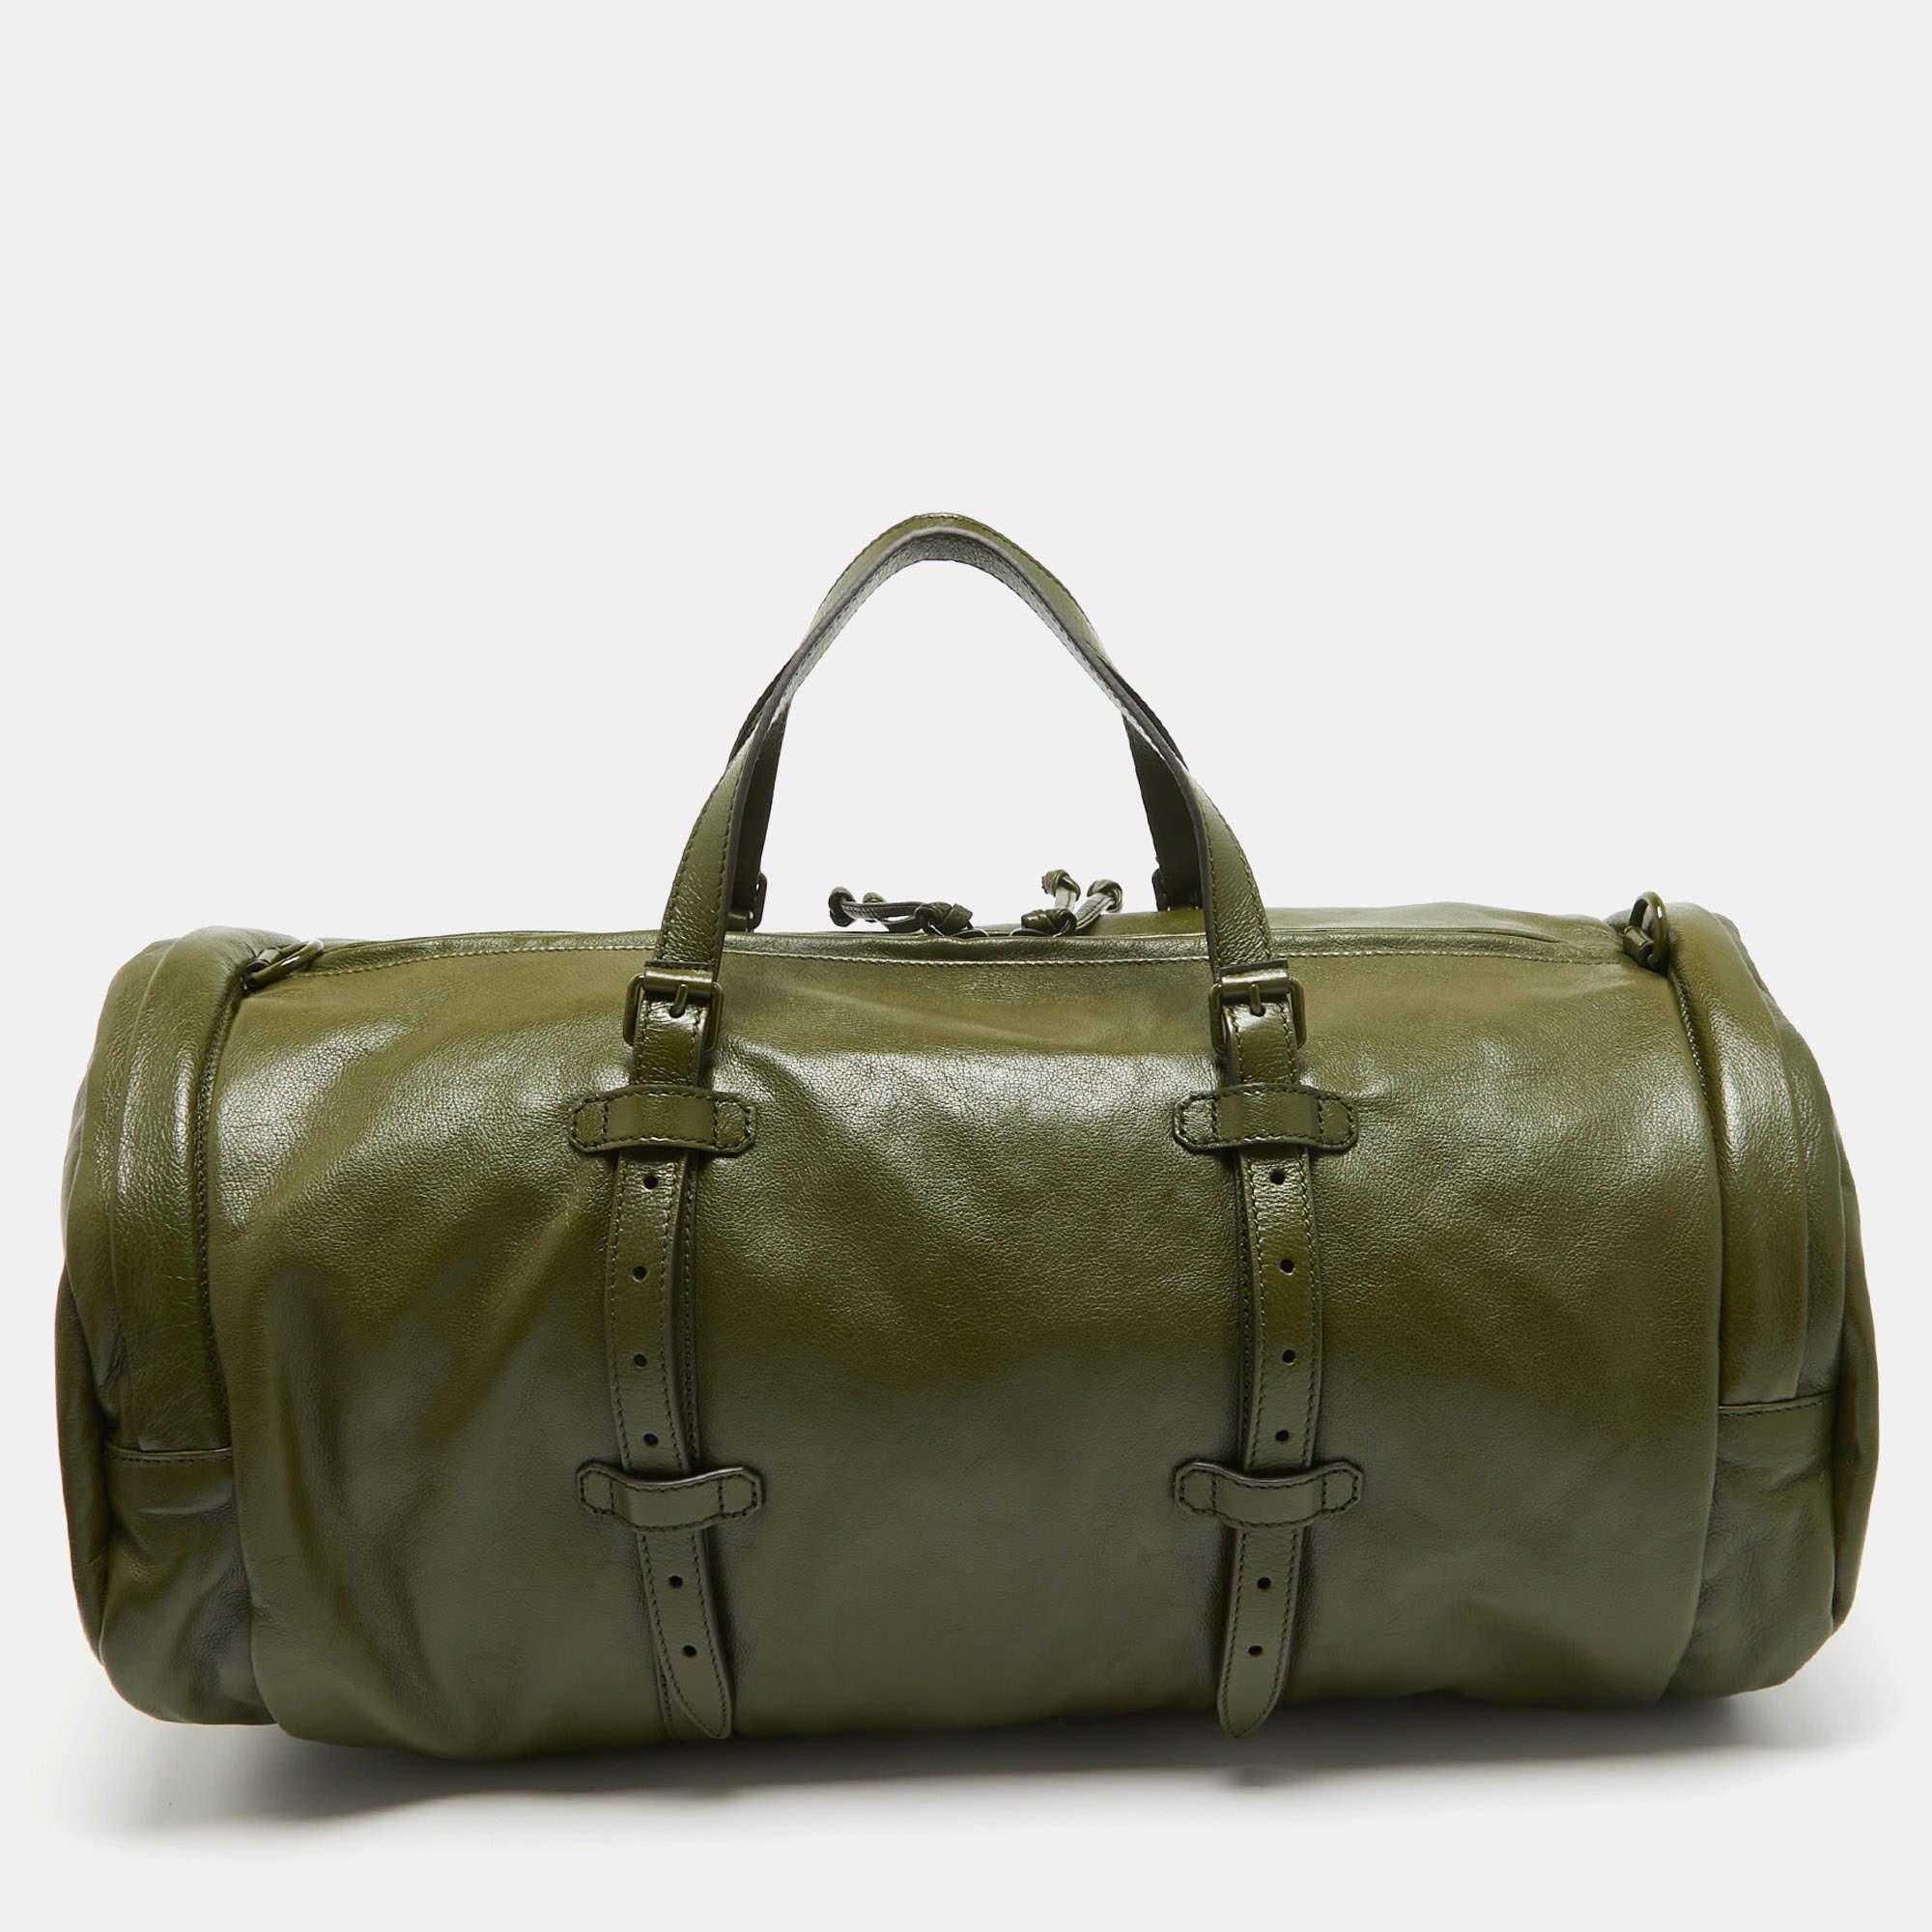 Gucci Green Leather Large Tonal Double G Duffle Bag For Sale 7